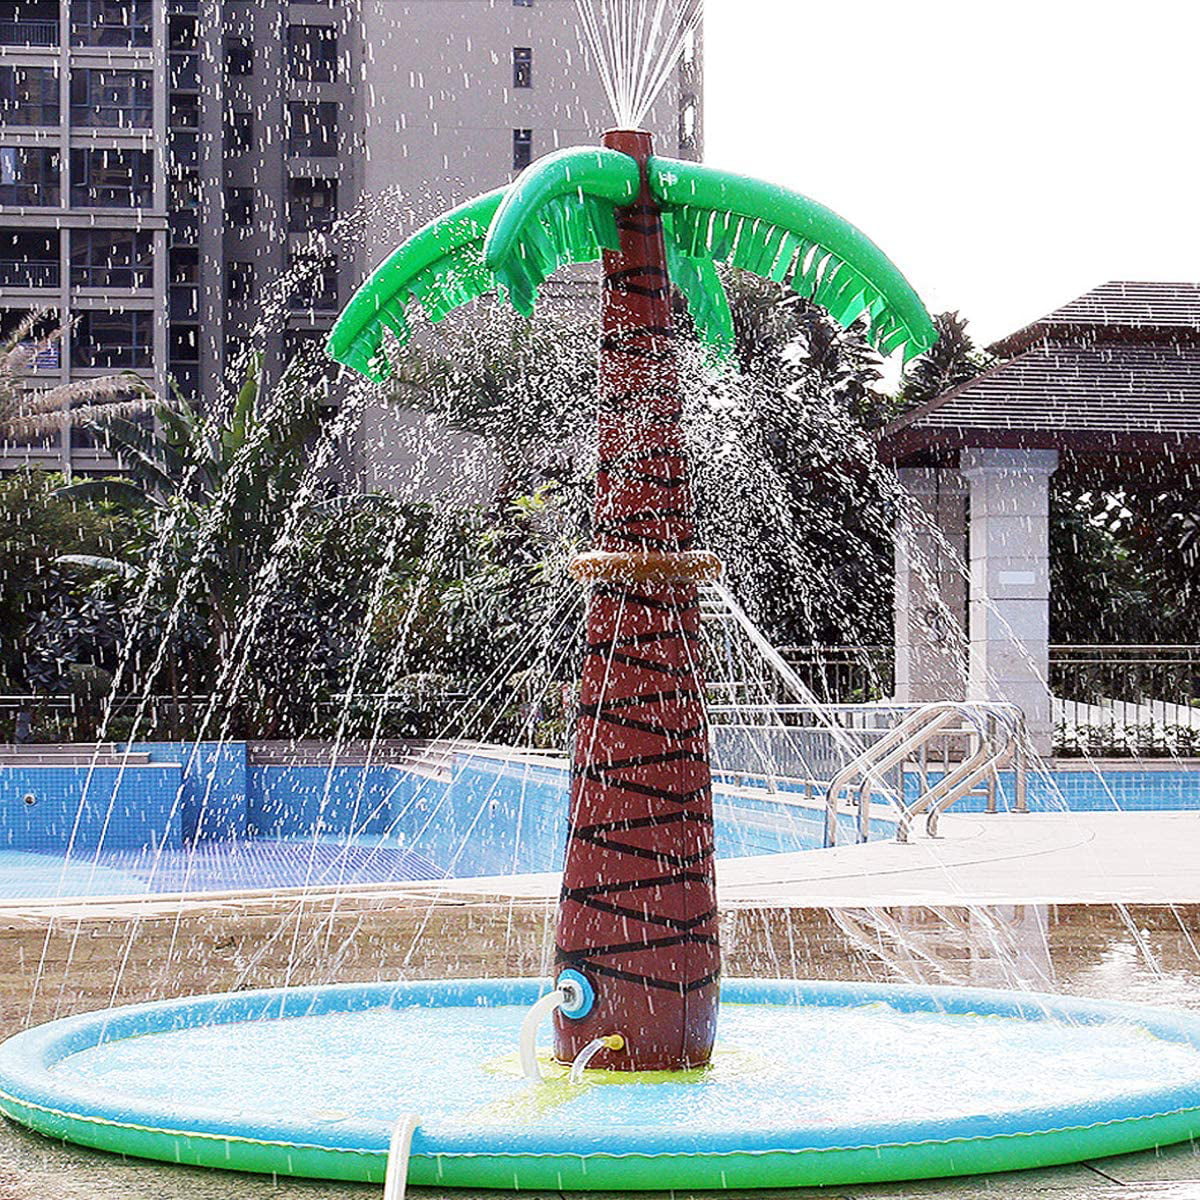 HALOFUNS 2021 New Sprinkle Splash Palm Tree Pad Inflatable 70 Width Water Play Spray Mat Toy Outdoor Backyard Sprinkler for Kids Summer Gift 